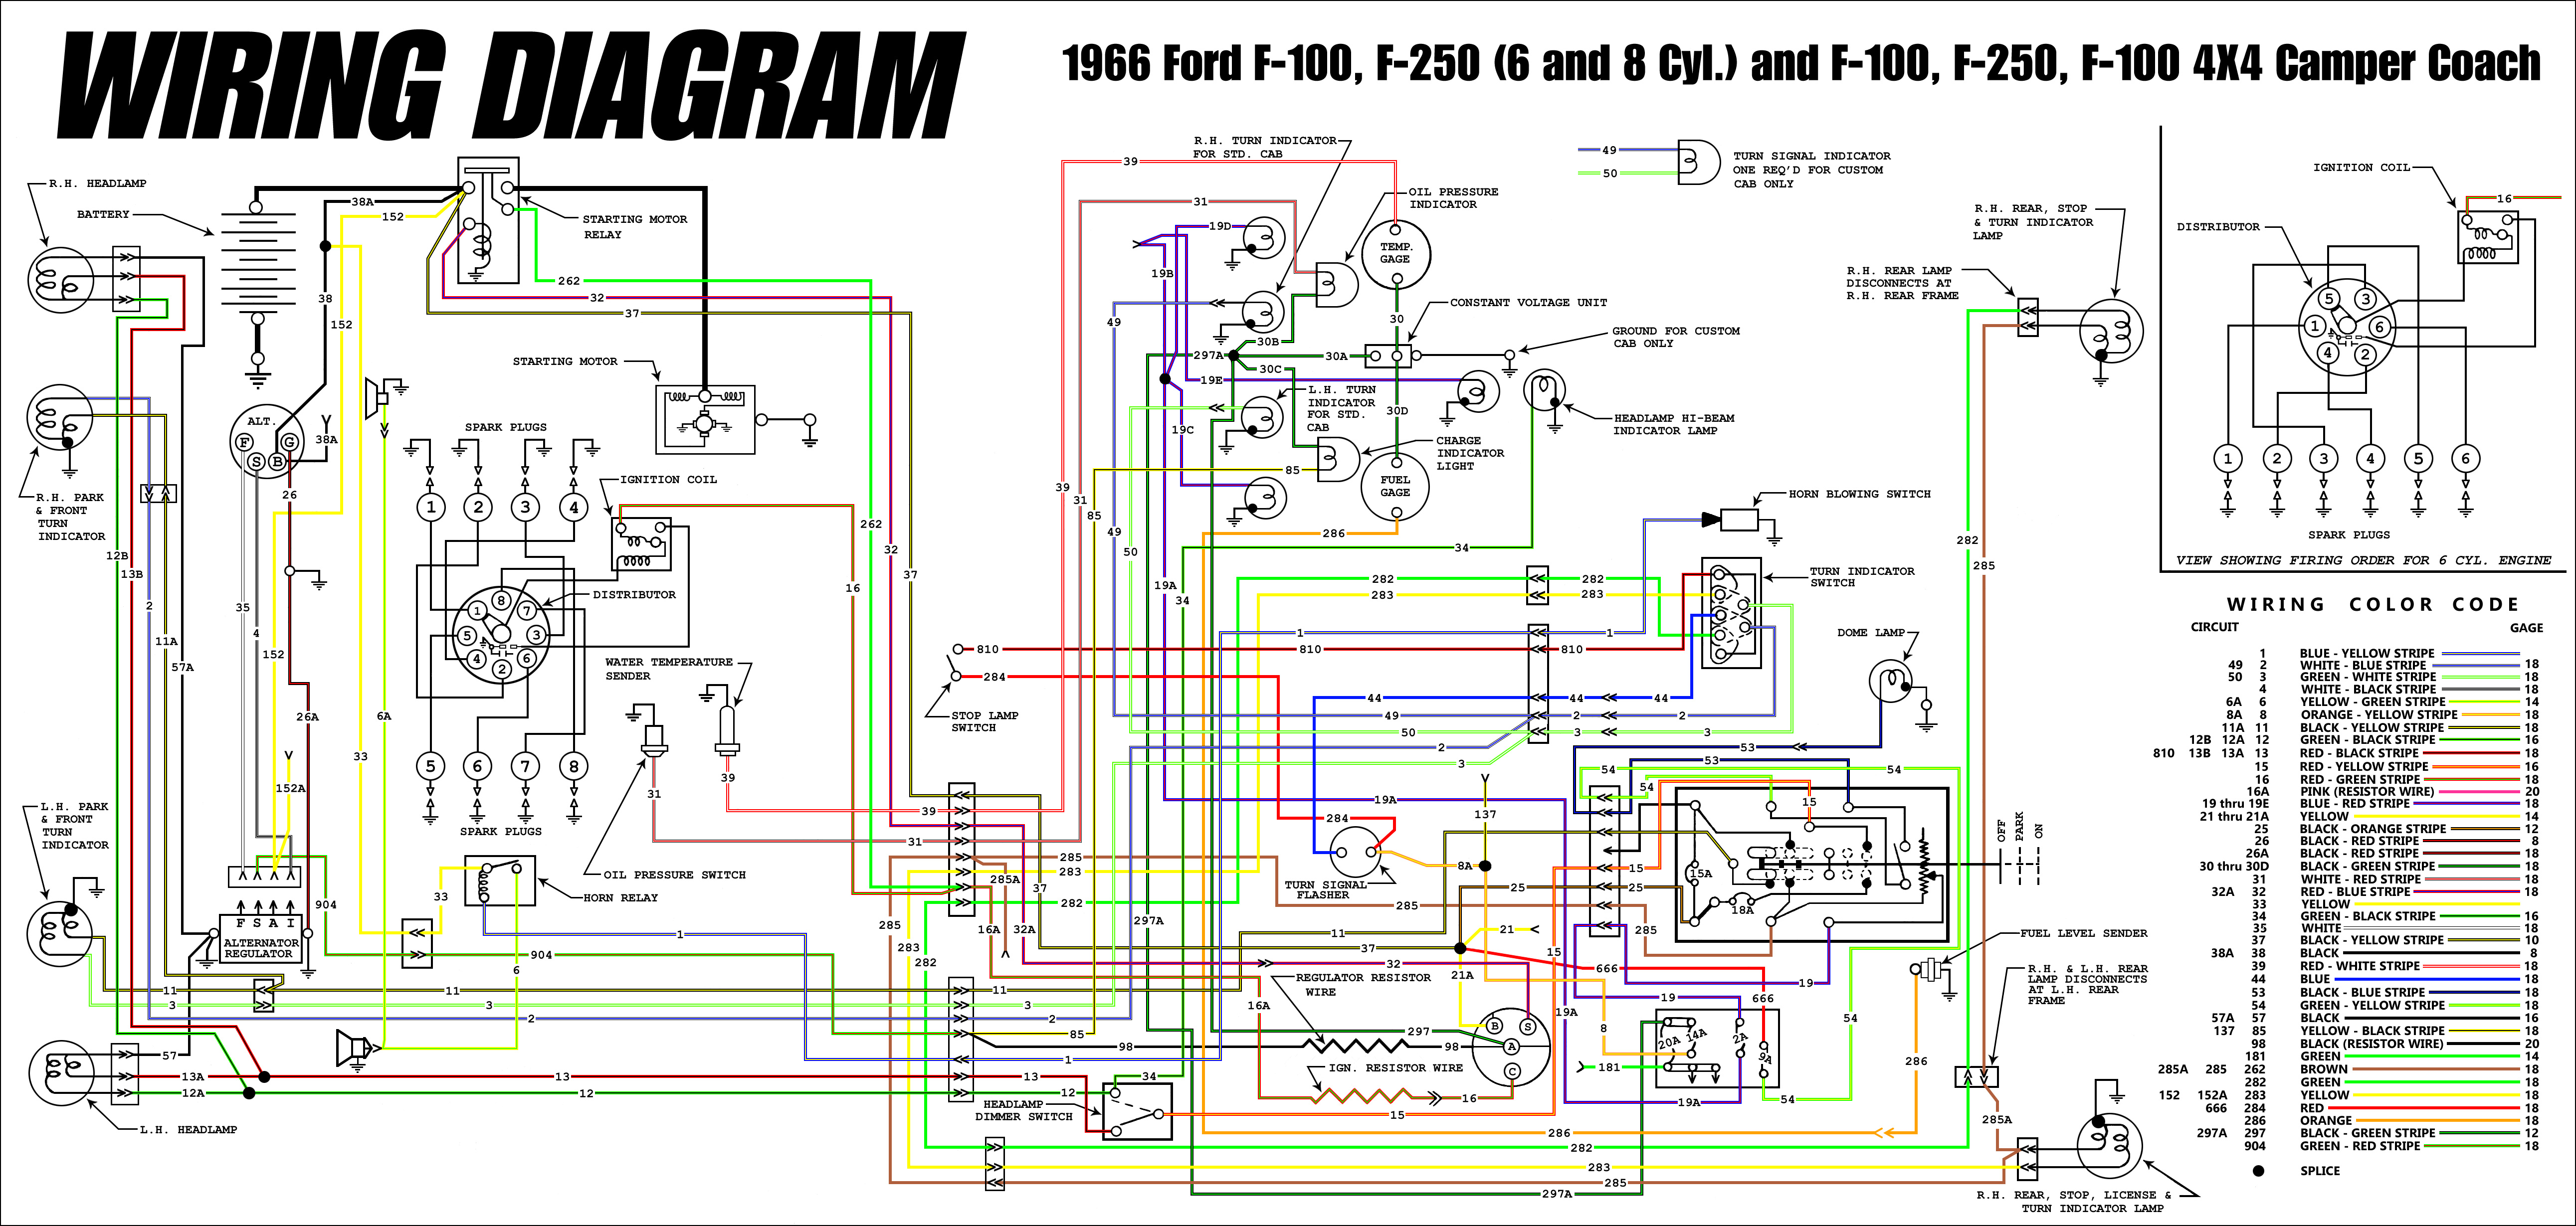 66 f100 cab light wiring - Ford Truck Enthusiasts Forums wiring schematic for 1963 ford f 100 